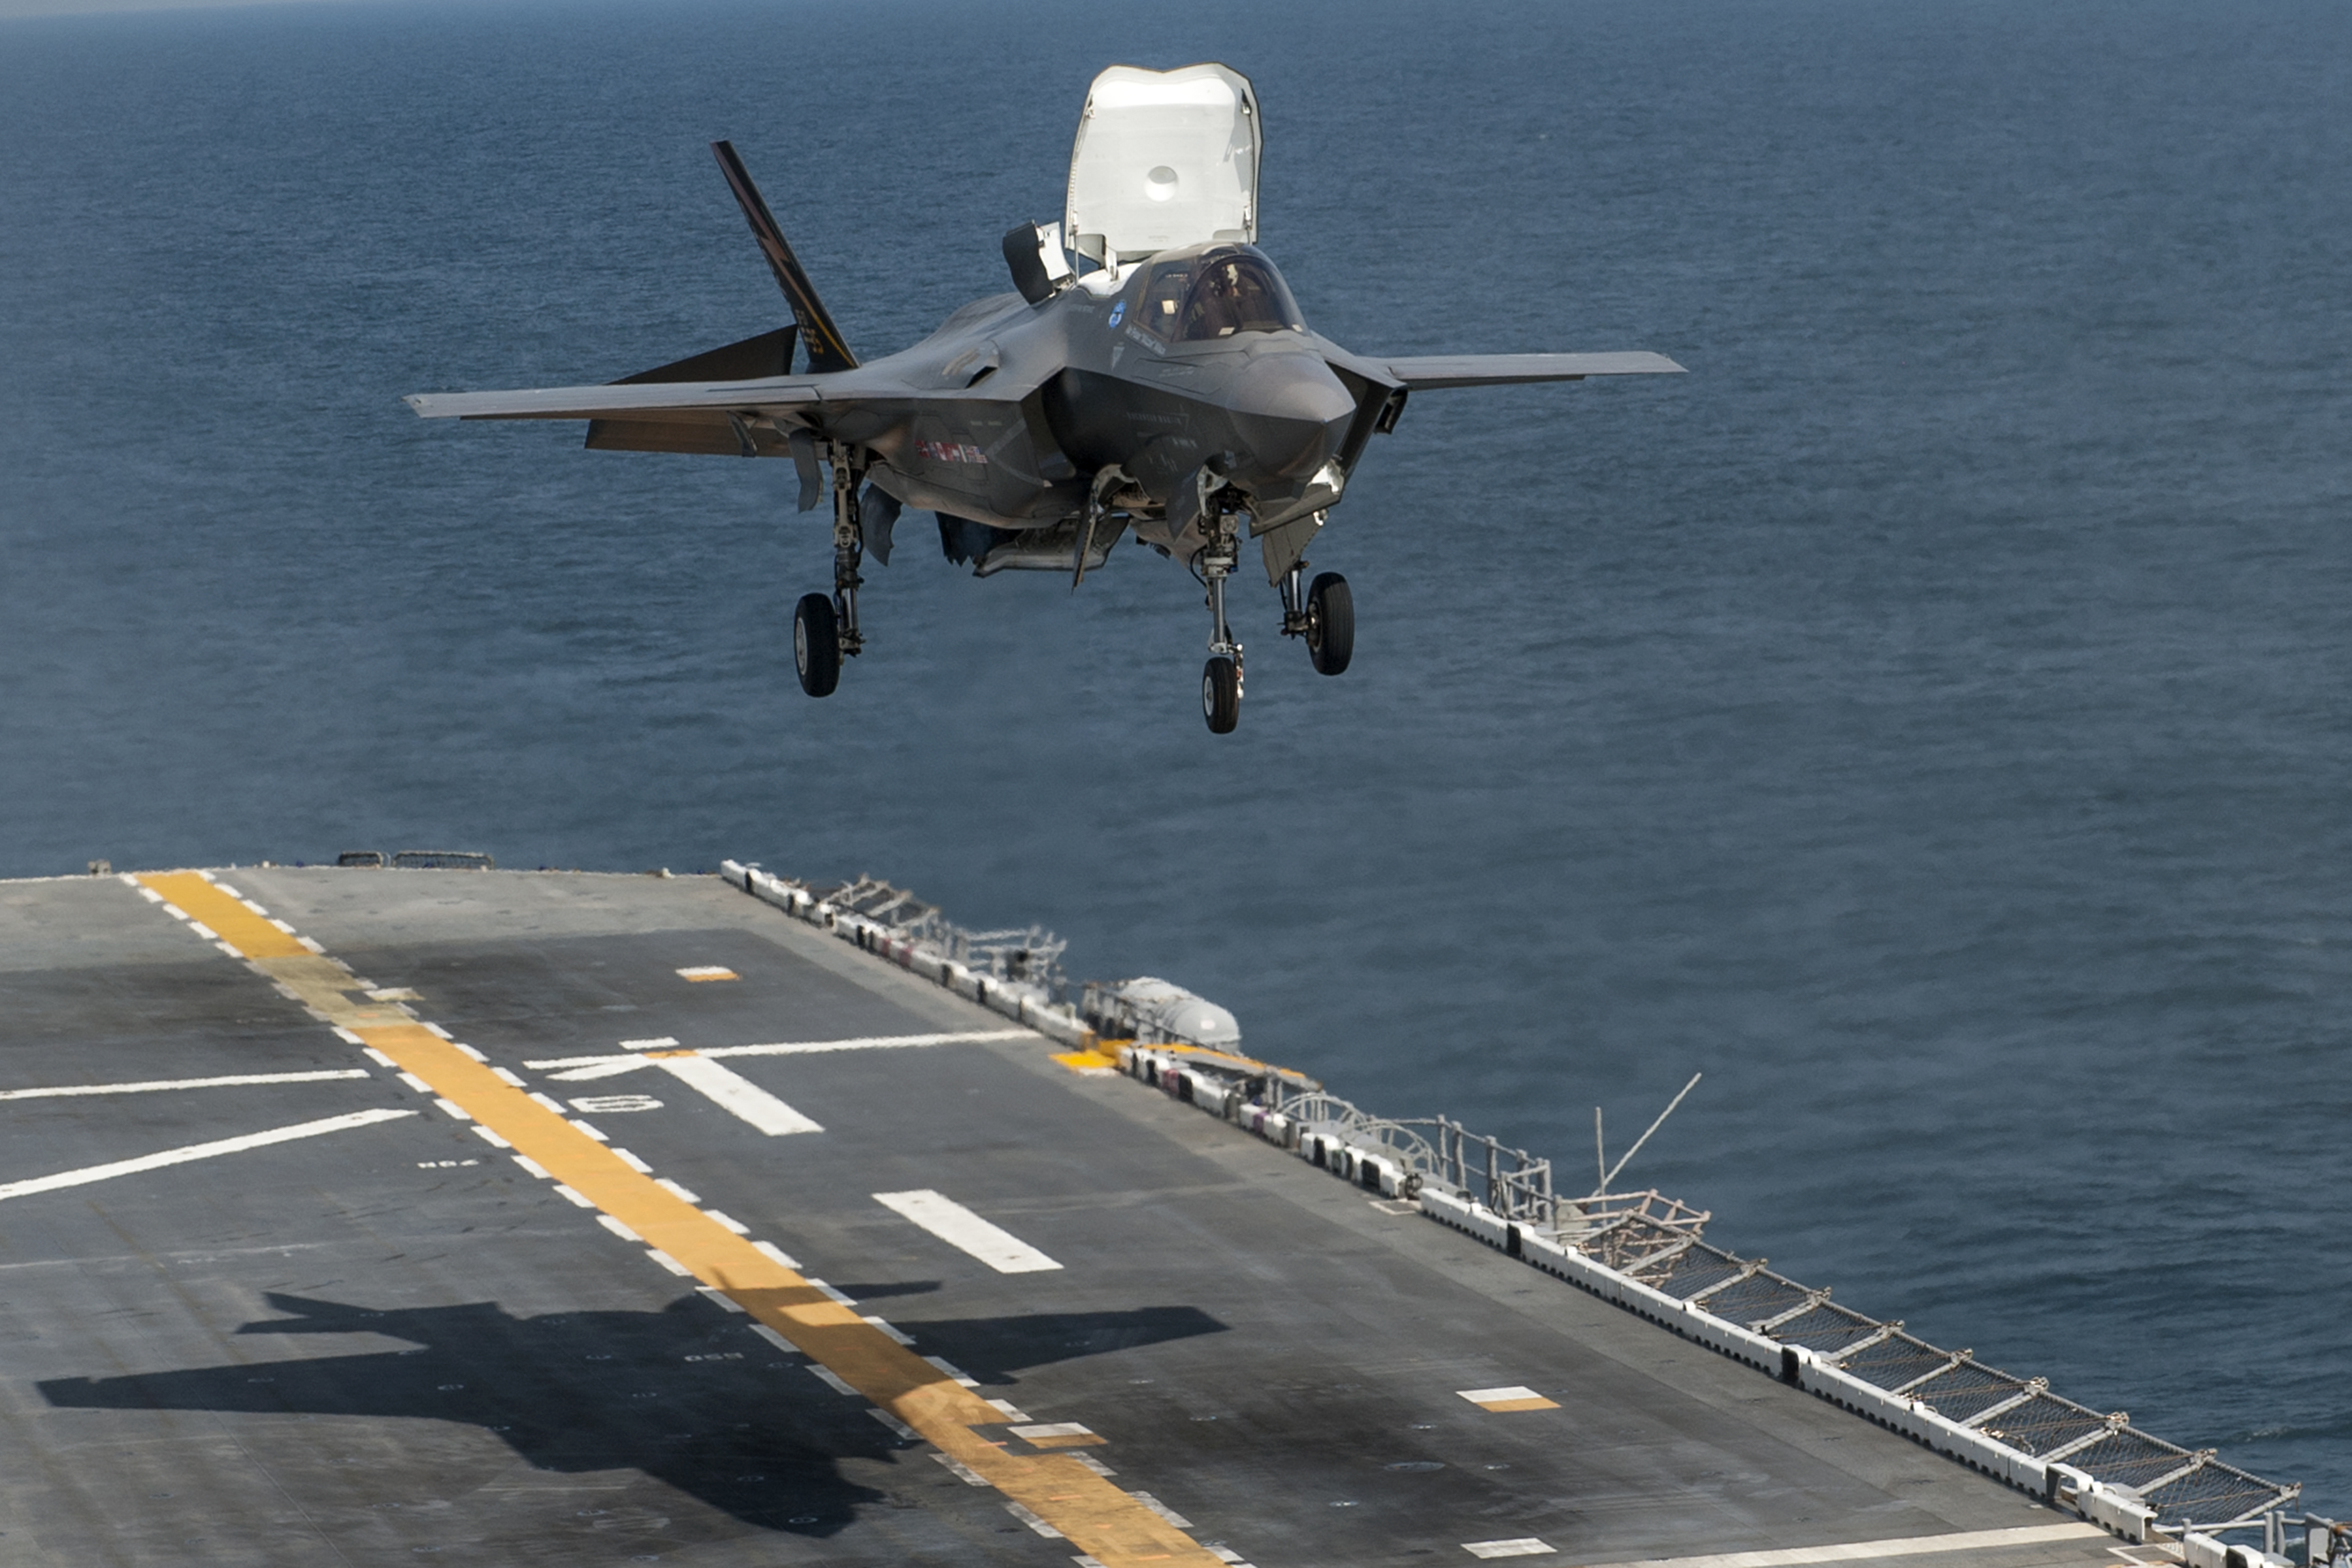 An F-35B Lightning II aircraft takes off from the amphibious assault ship USS Wasp (LHD-1). US Navy Photo